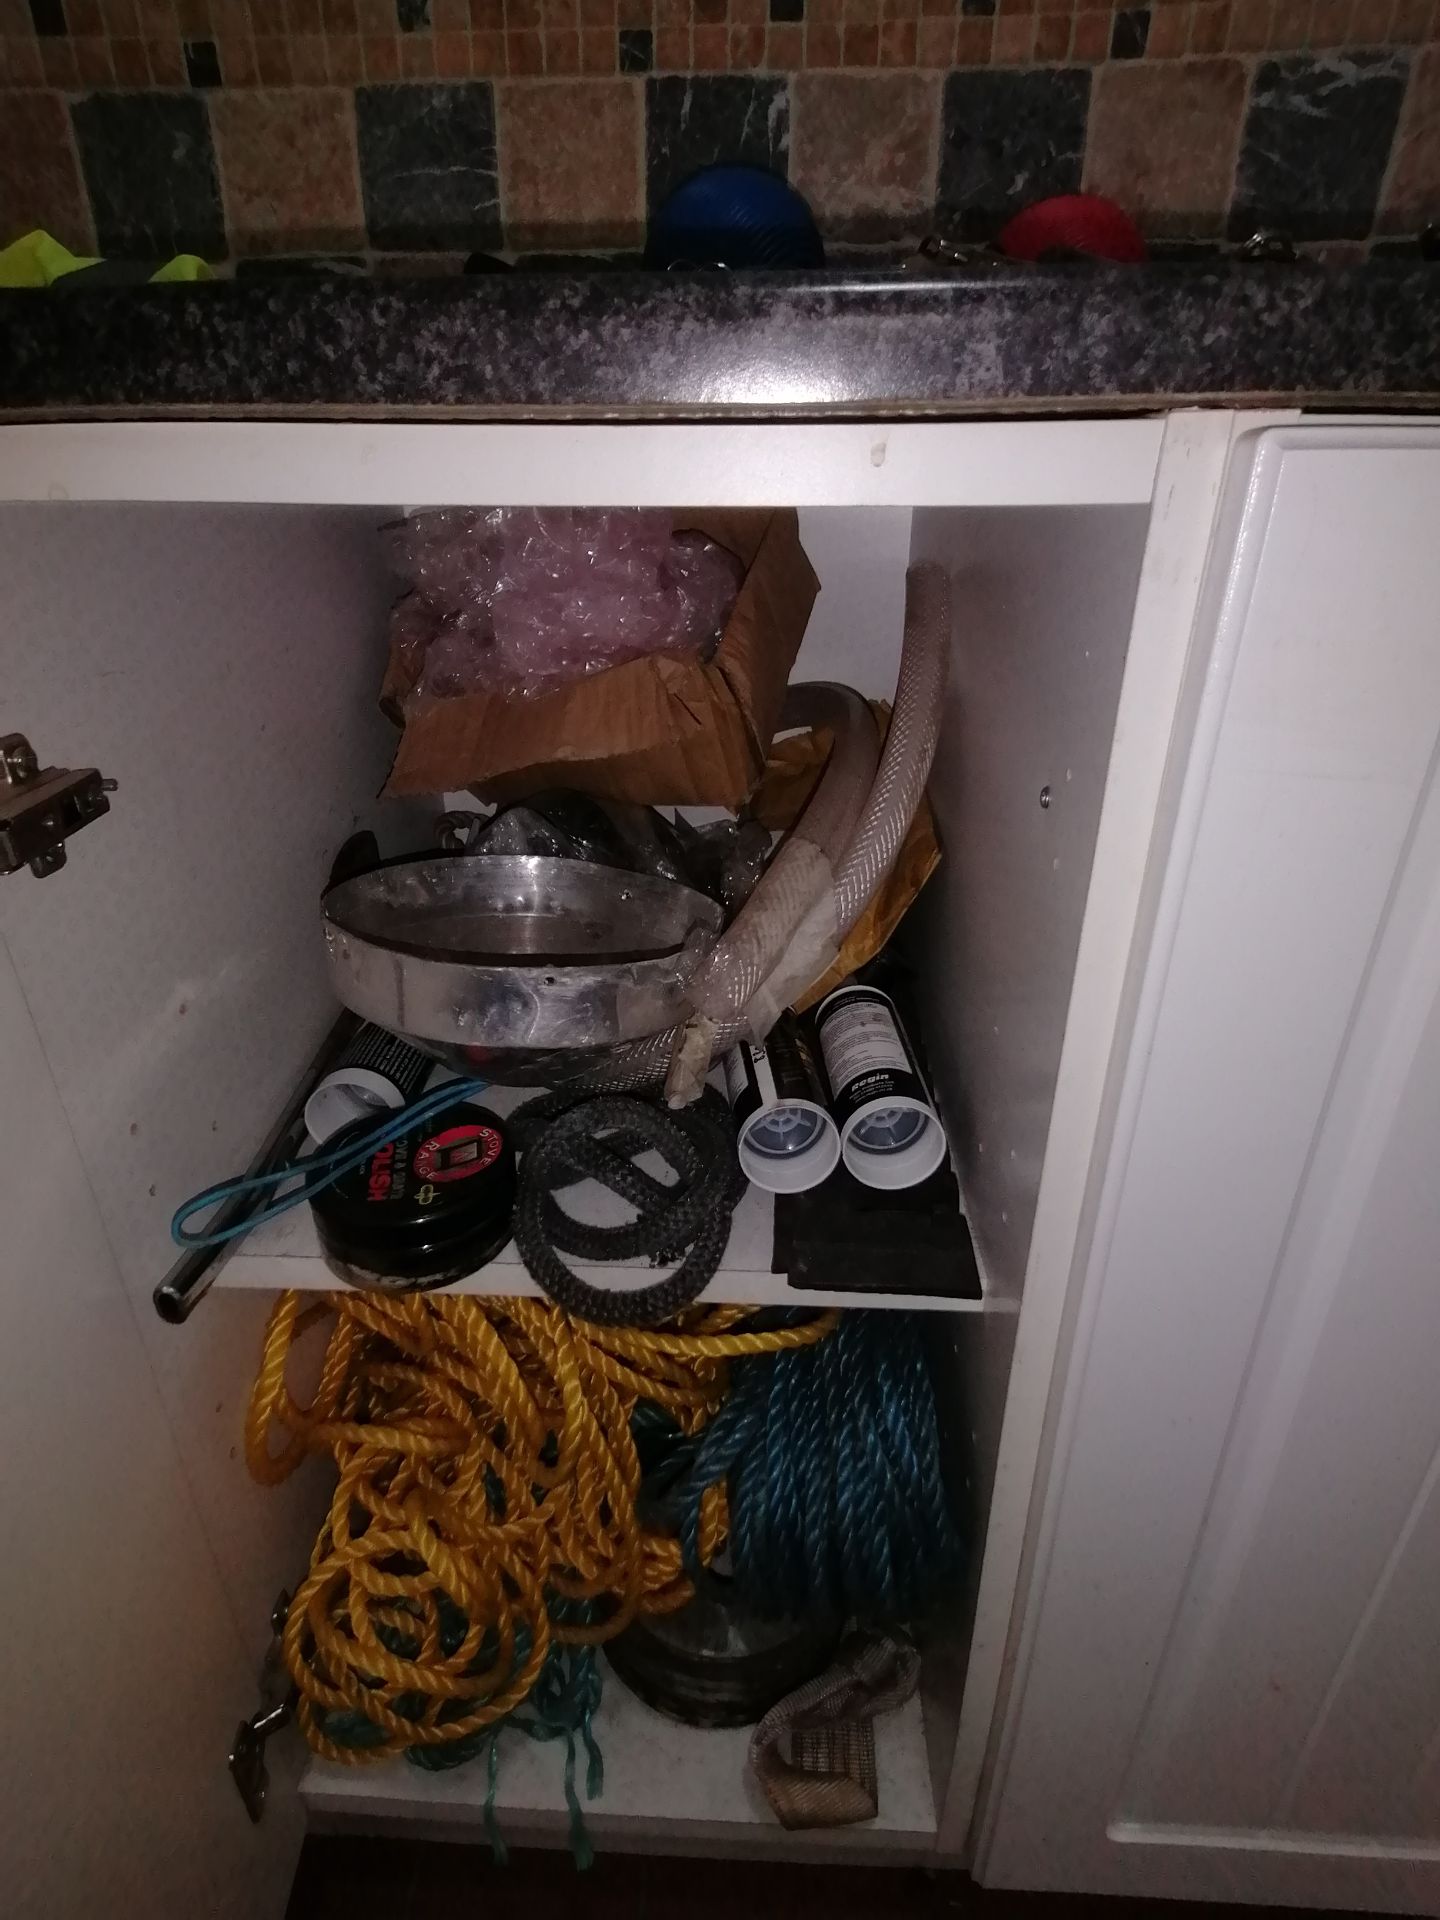 Contents only of starage cupboards as shown - Image 26 of 30